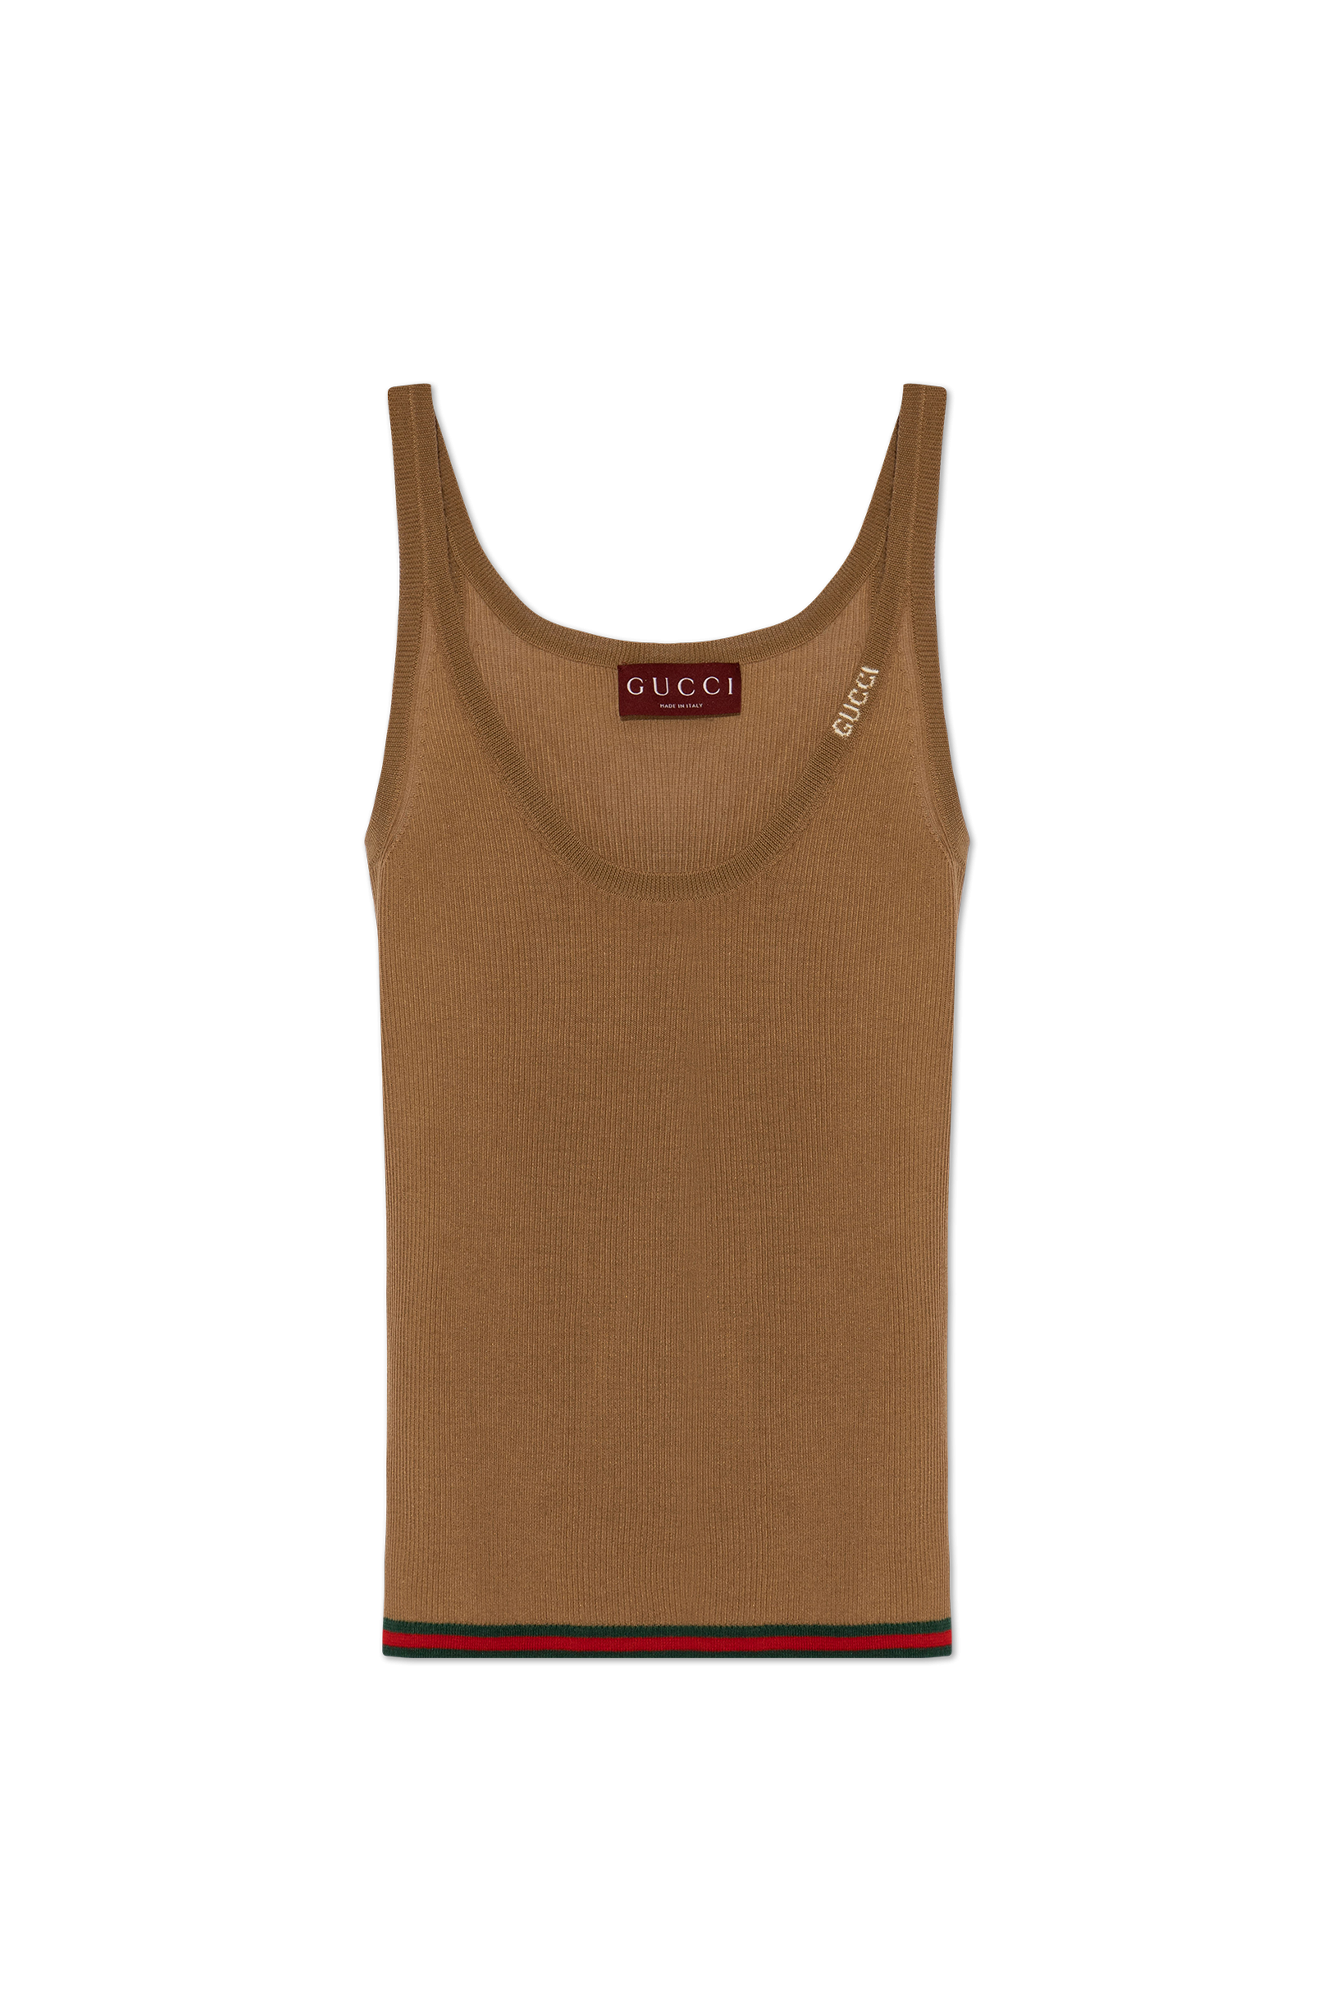 Gucci Cropped tank top, Women's Clothing